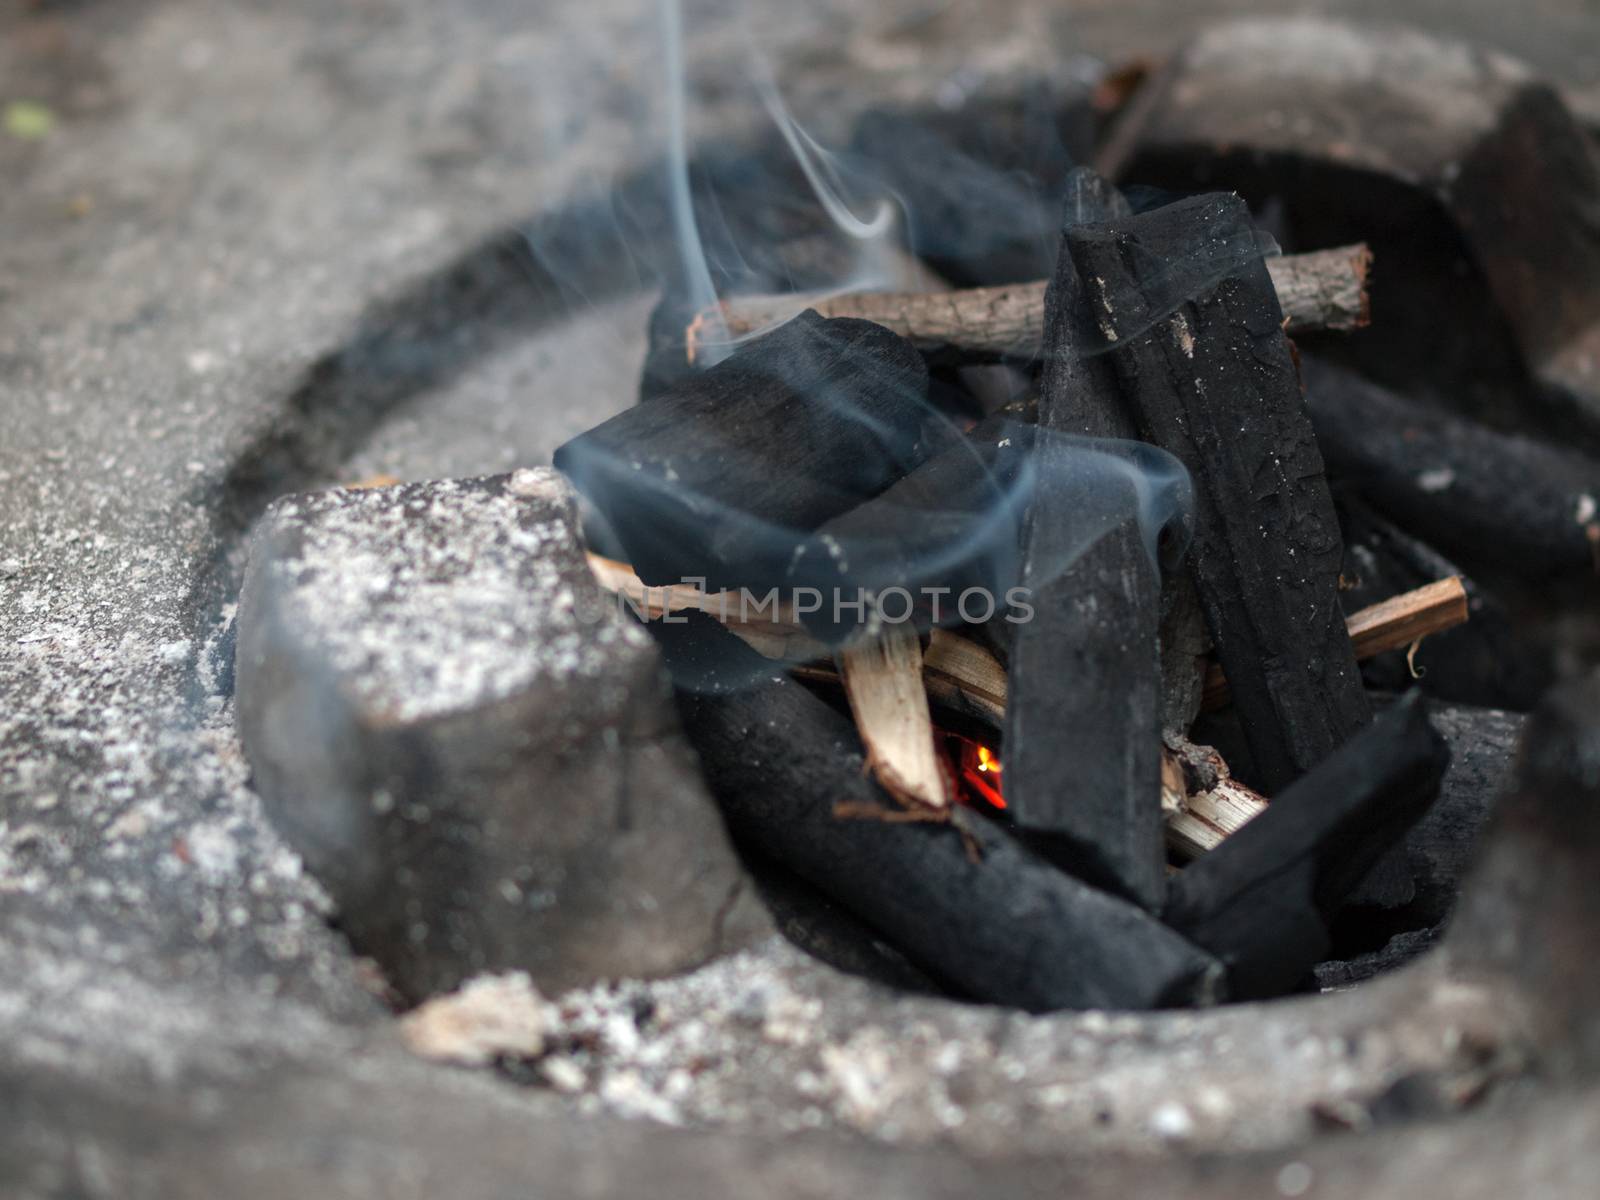 CHARCOAL FIRE IN STOVE by PrettyTG